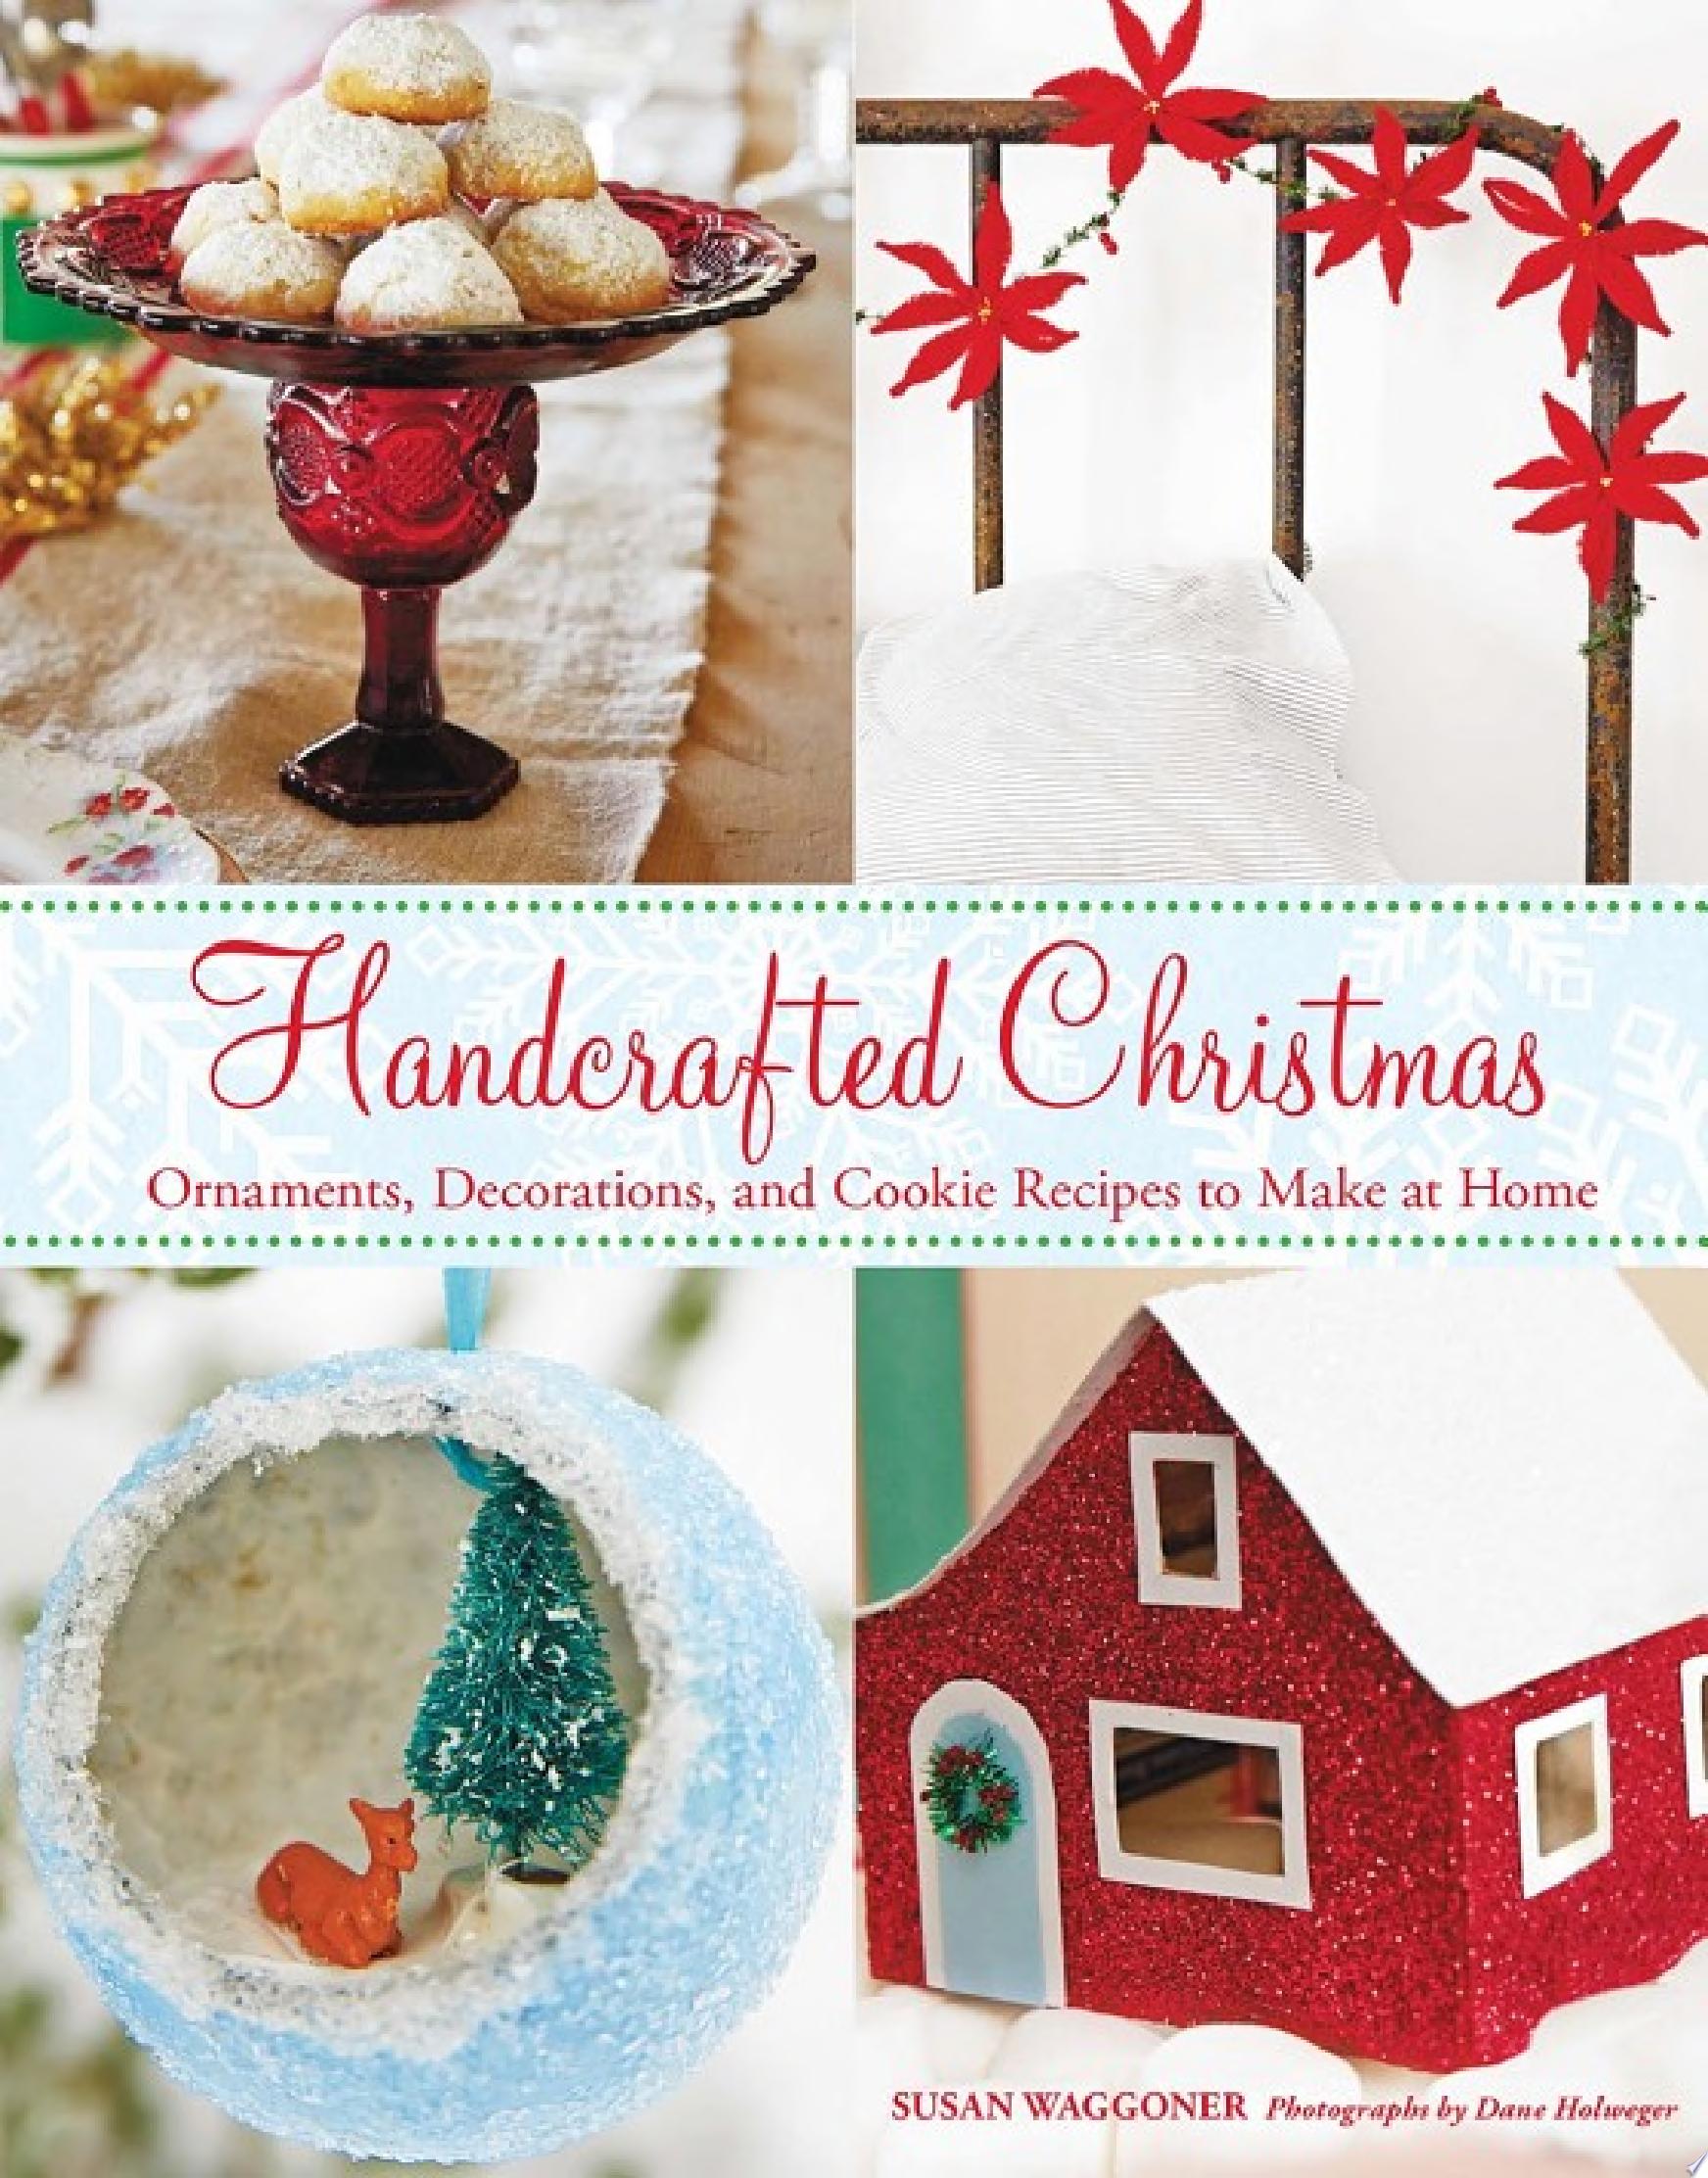 Image for "Handcrafted Christmas"